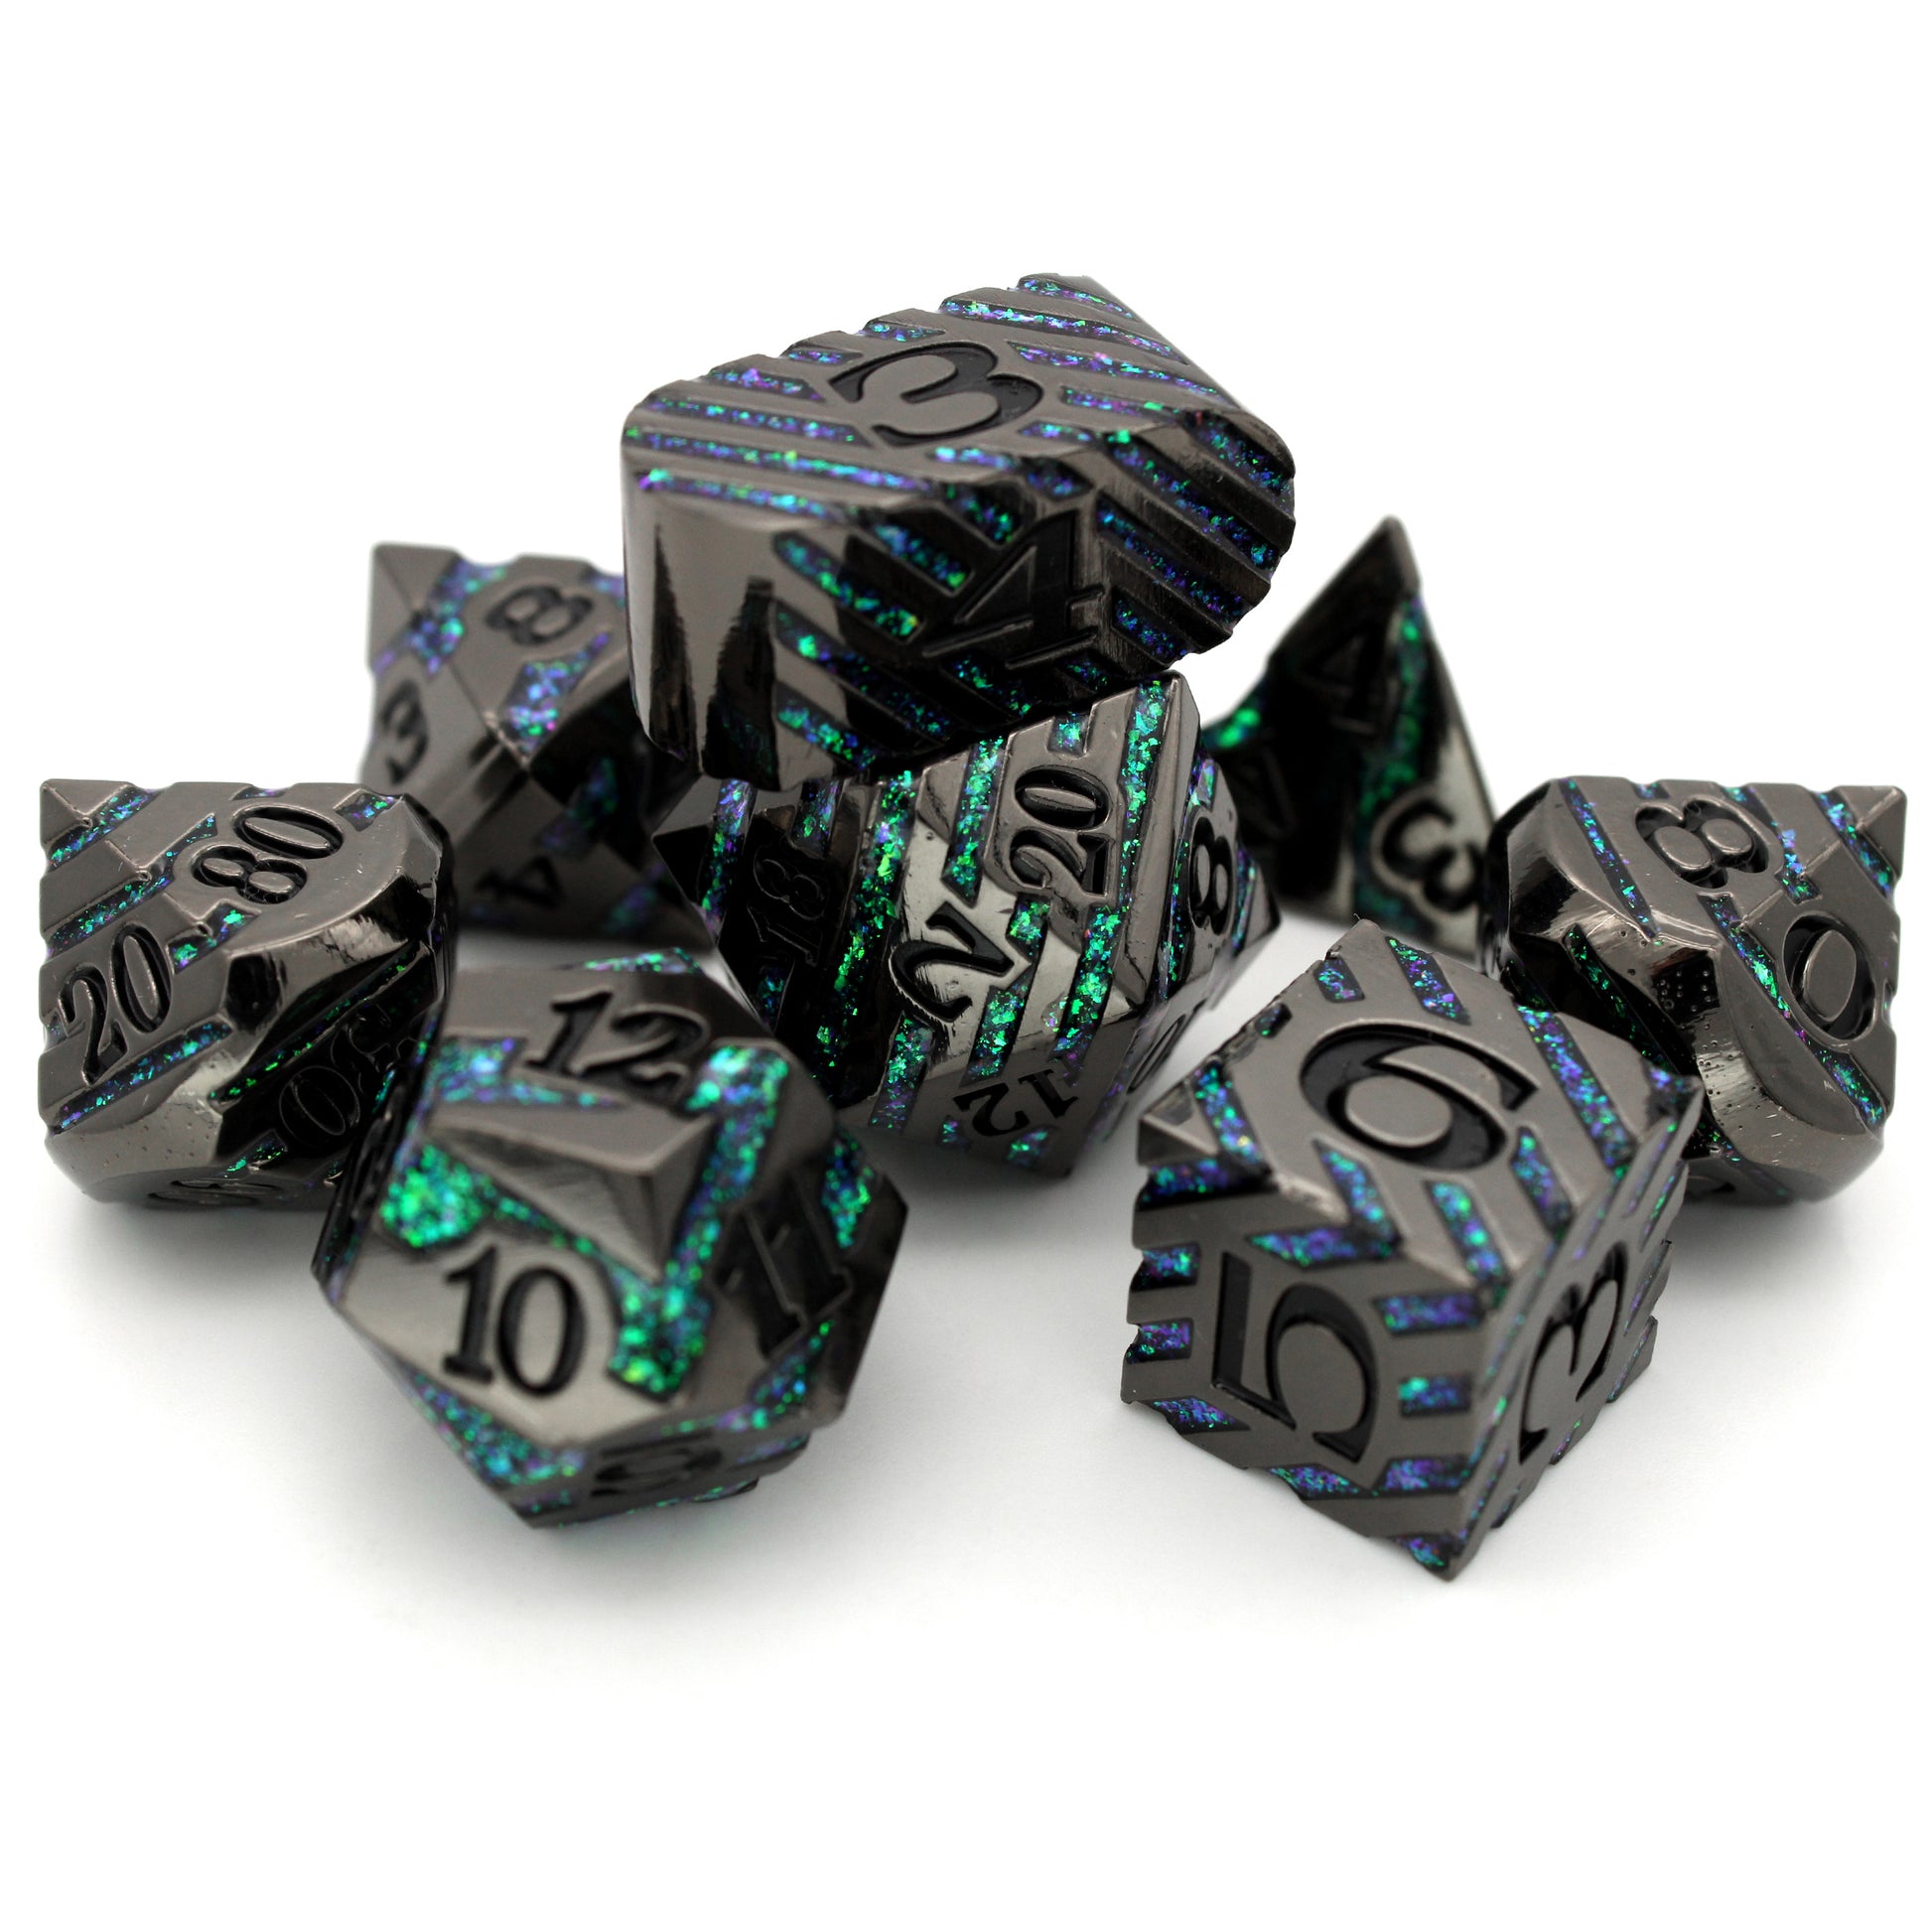 Street Creds is an 8-piece black metal set banded in a wraparound enamel fill of scintillating green. It is part of the Cyberpunk collection, sister to our Steampunk collection.